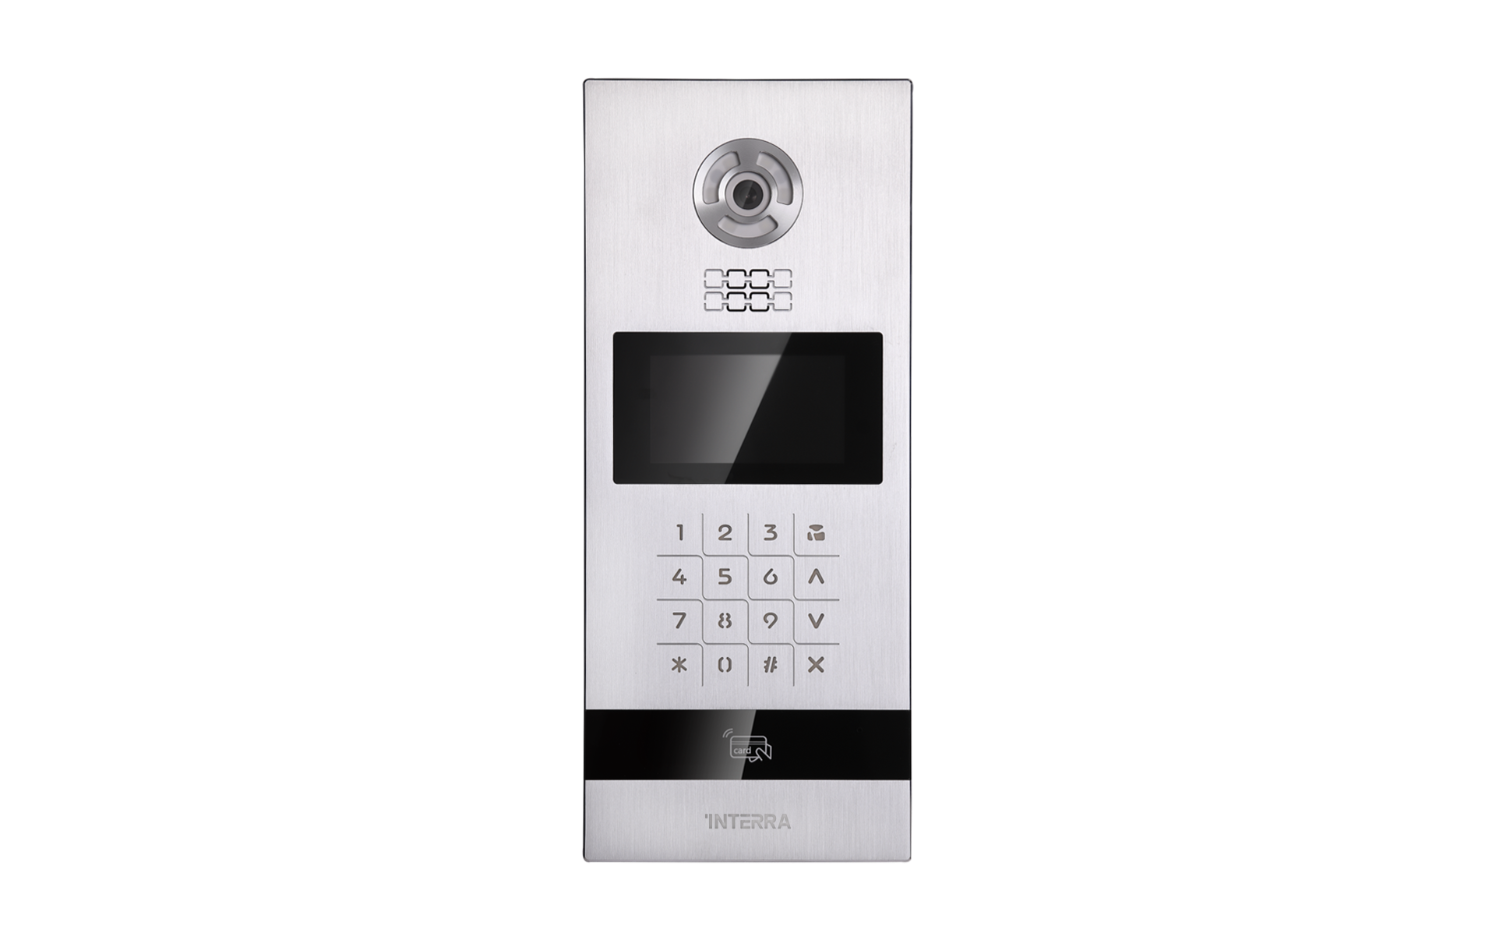 Android Outdoor Video Intercom w/ Face Recognition - 4.3" Color TFT LCD - Aluminium Body with Touch Buttons